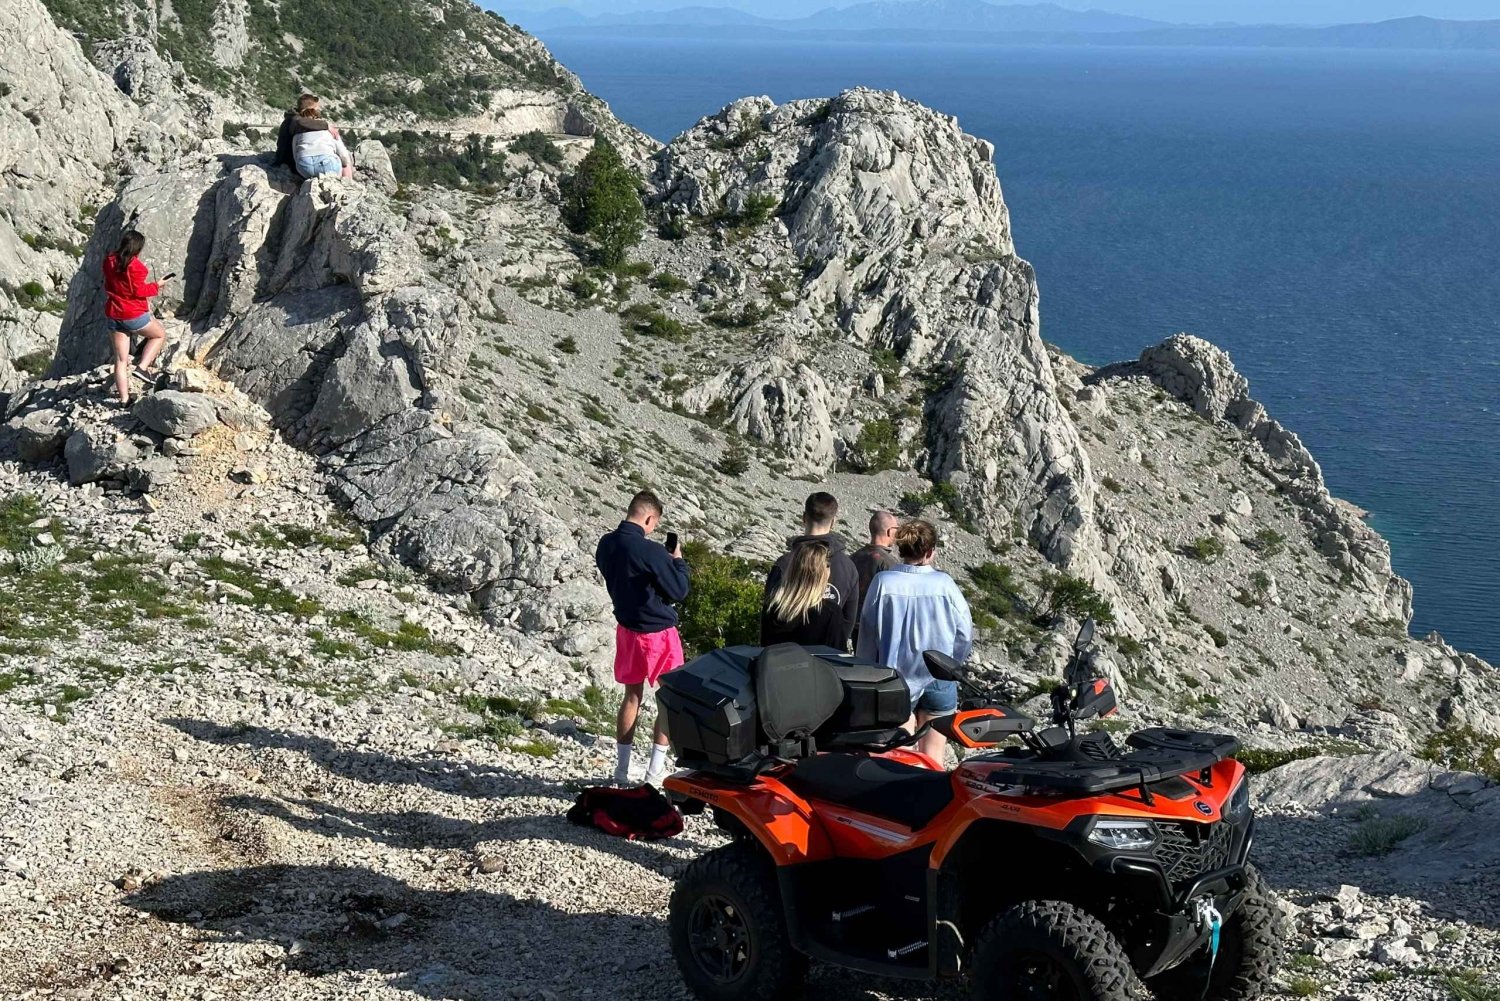 Top Quad Safari - The best way to experience Omis riviera